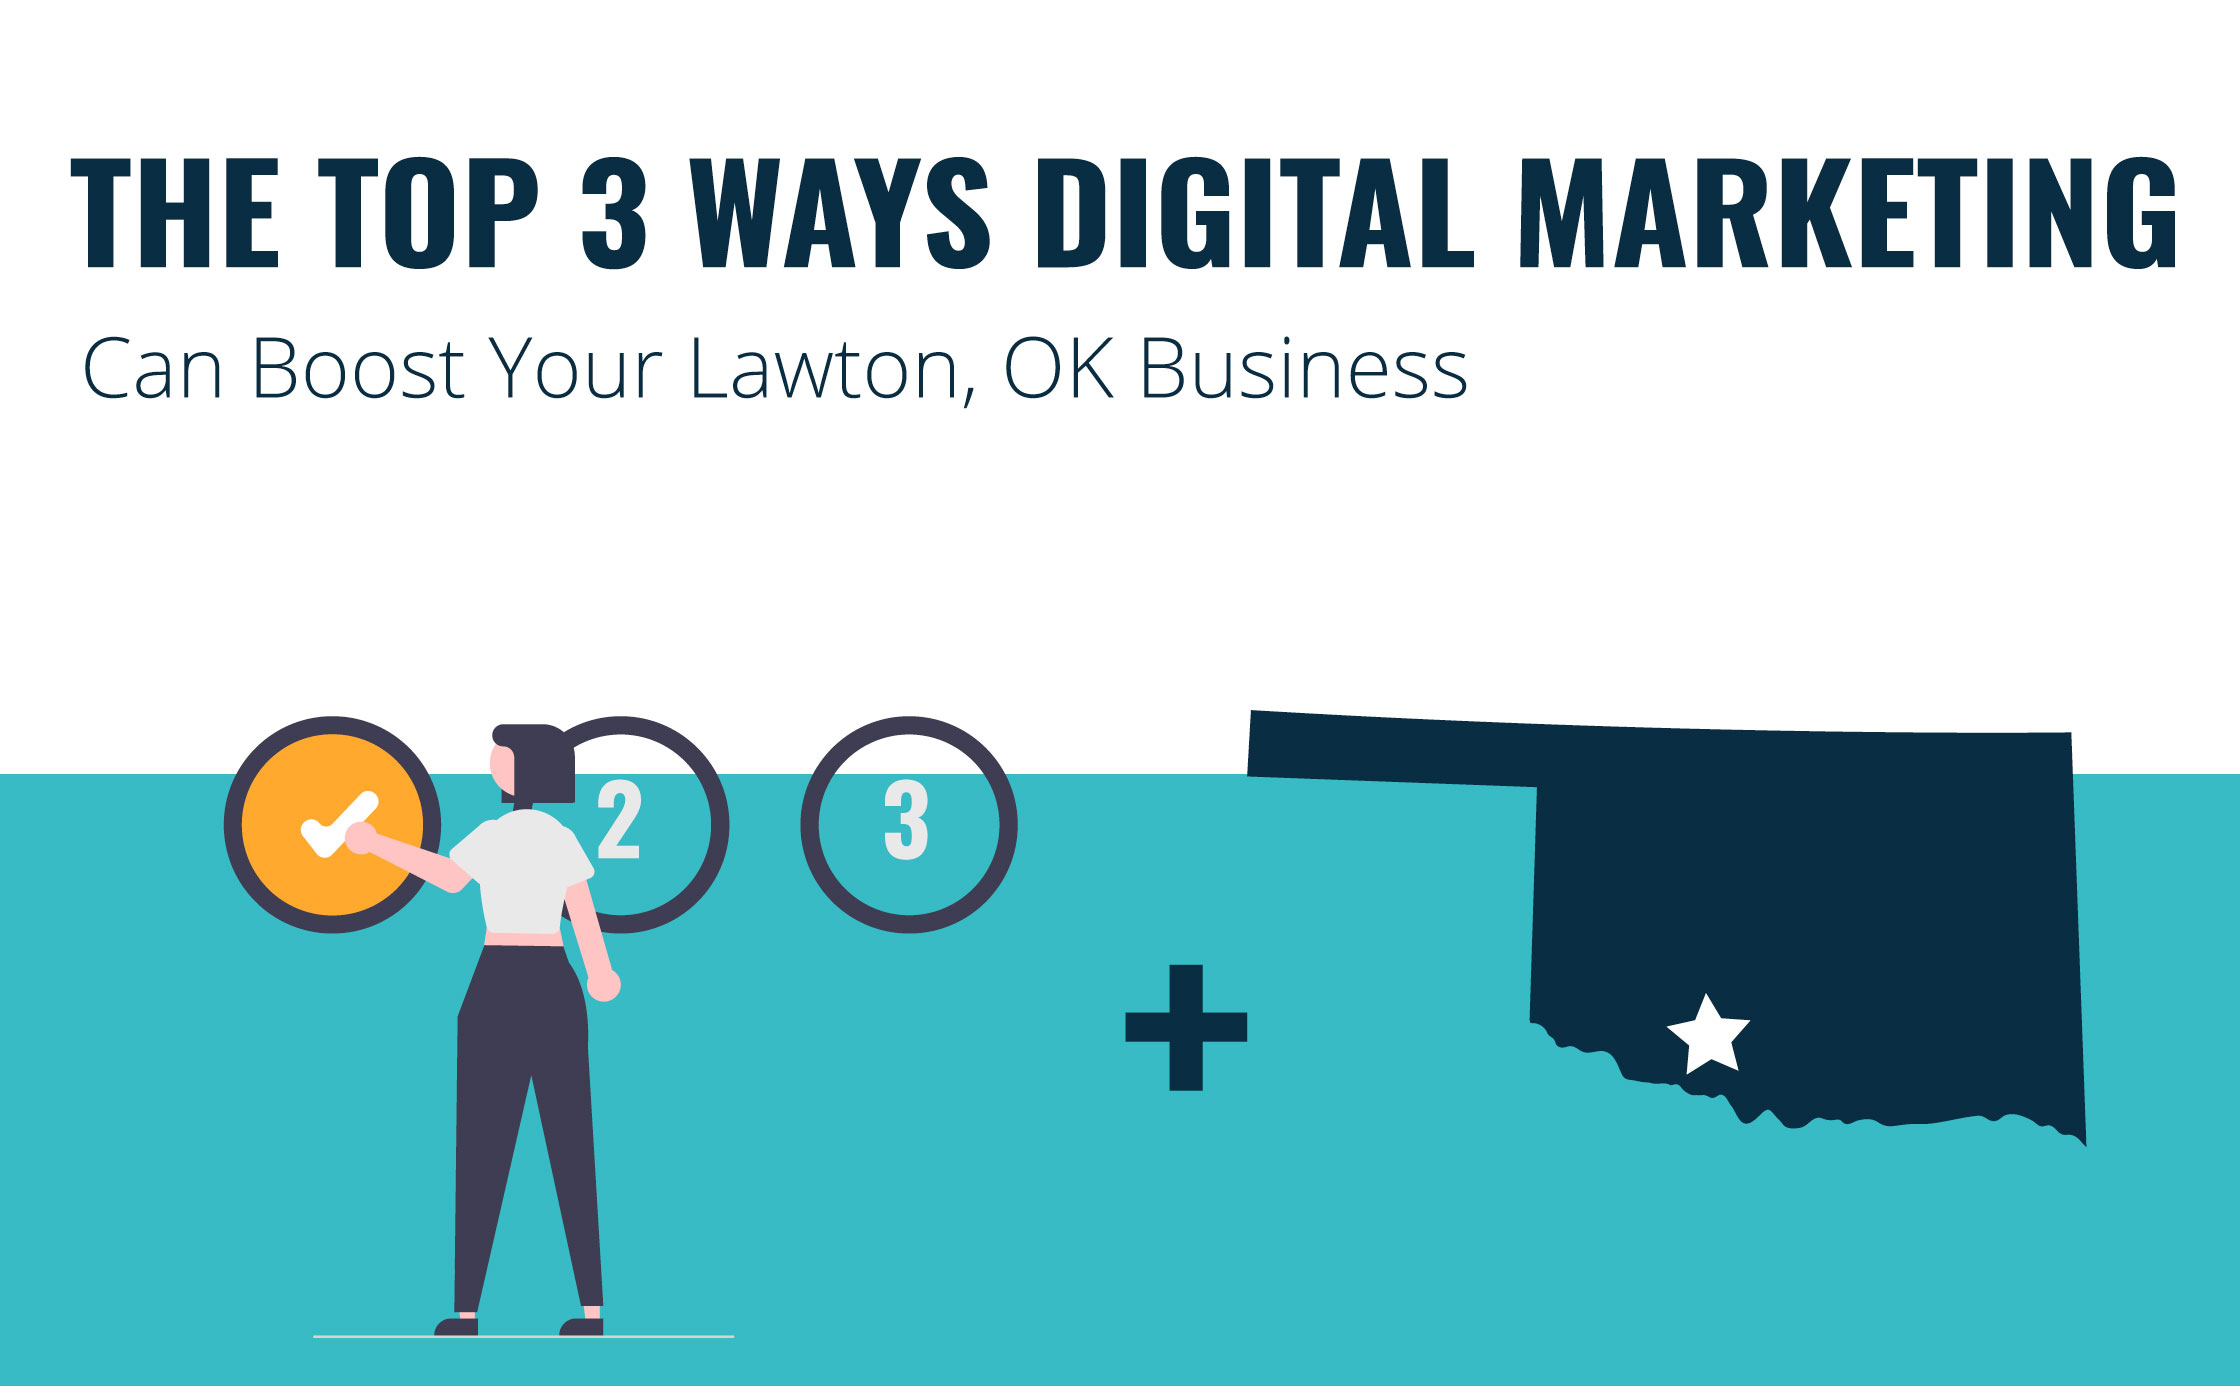 The Top 3 Ways Digital Marketing Can Boost Your Lawton, OK Business